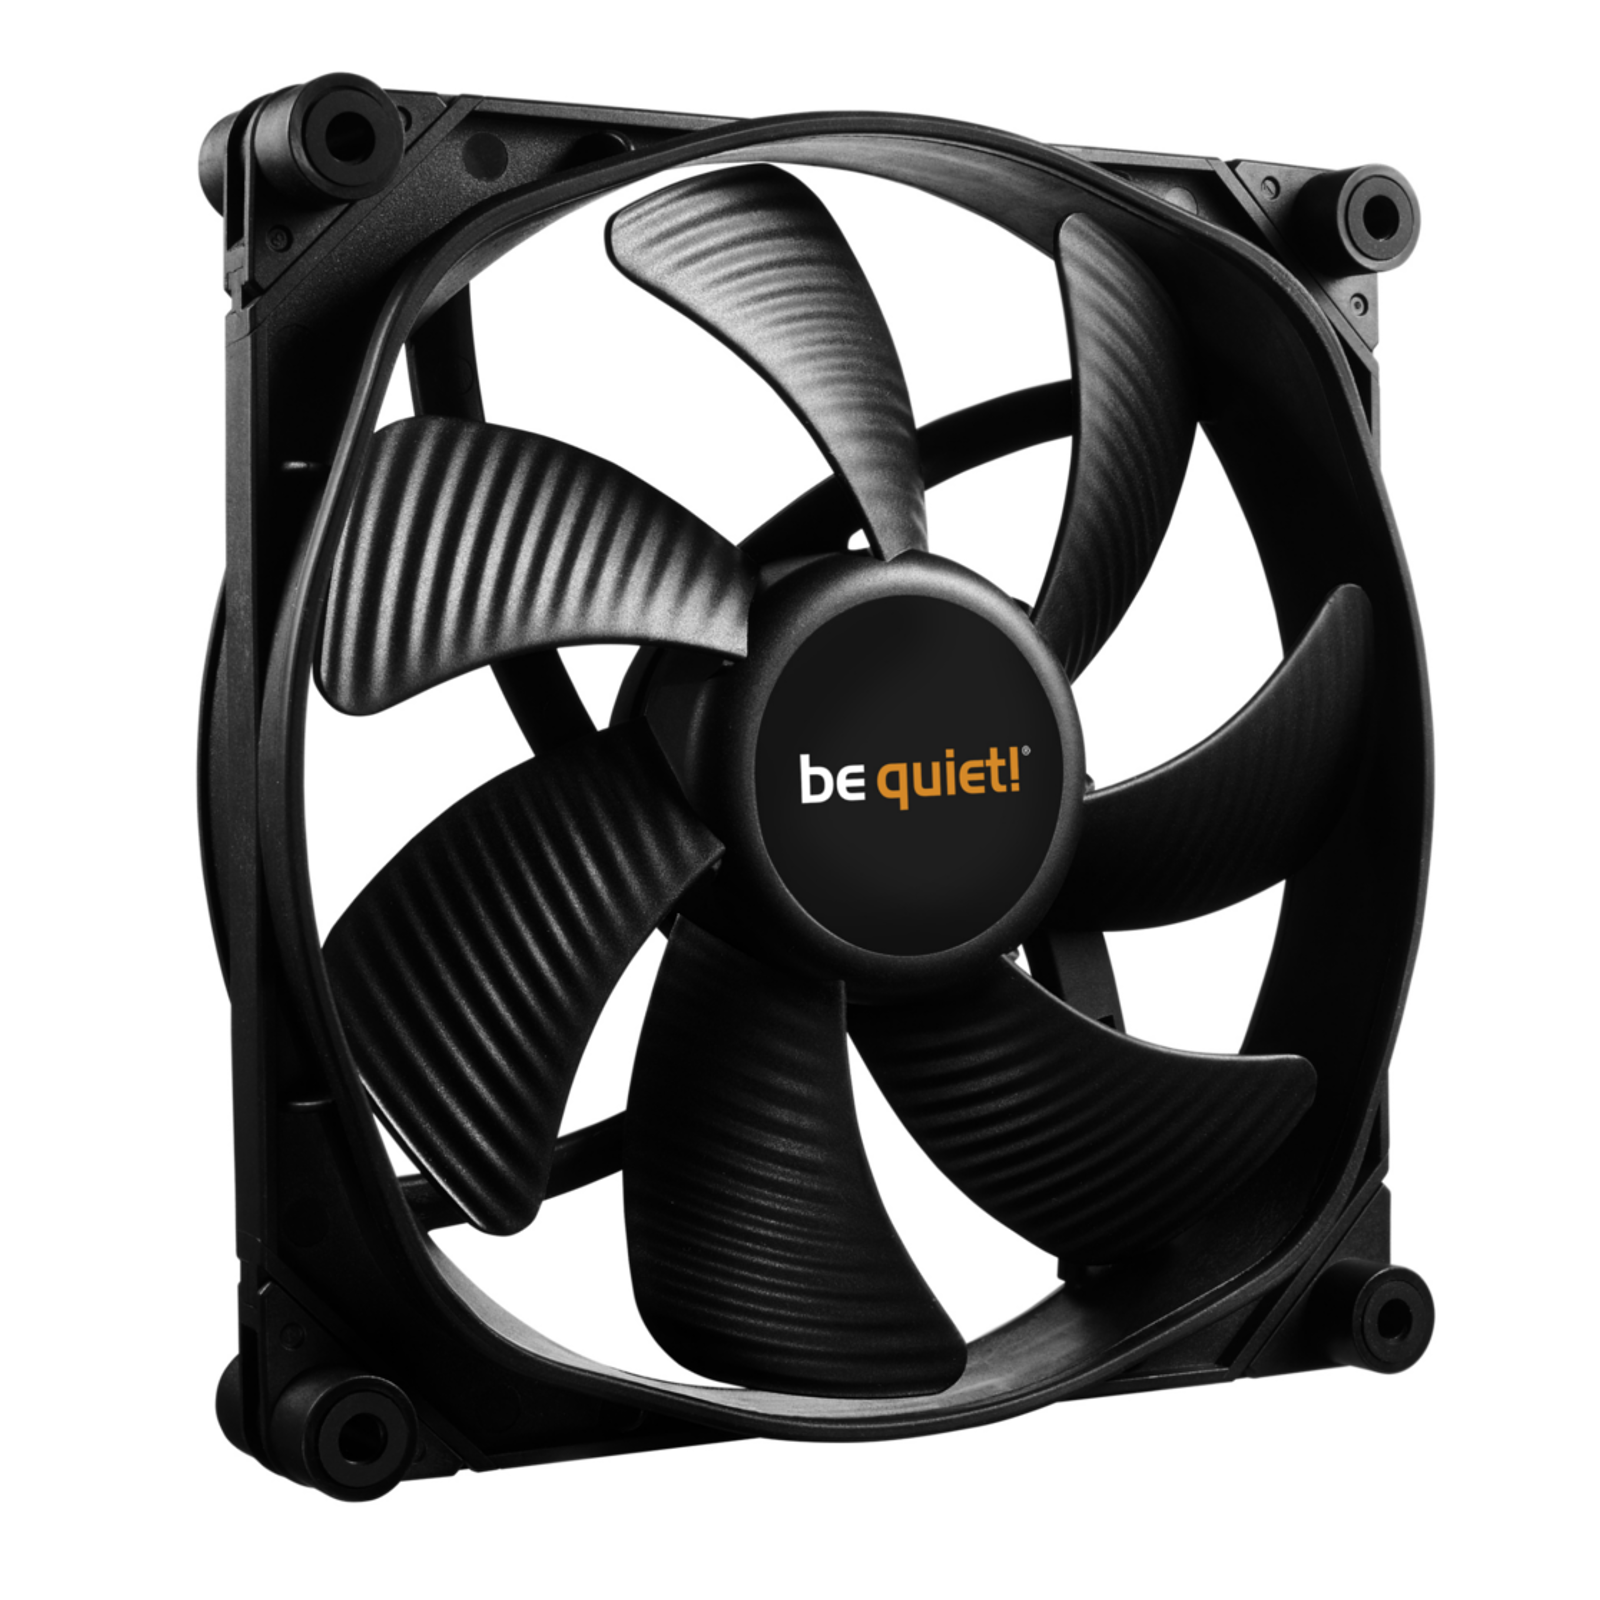 be quiet! - be quiet Silent Wings 3 120mm PWM High Speed Fan